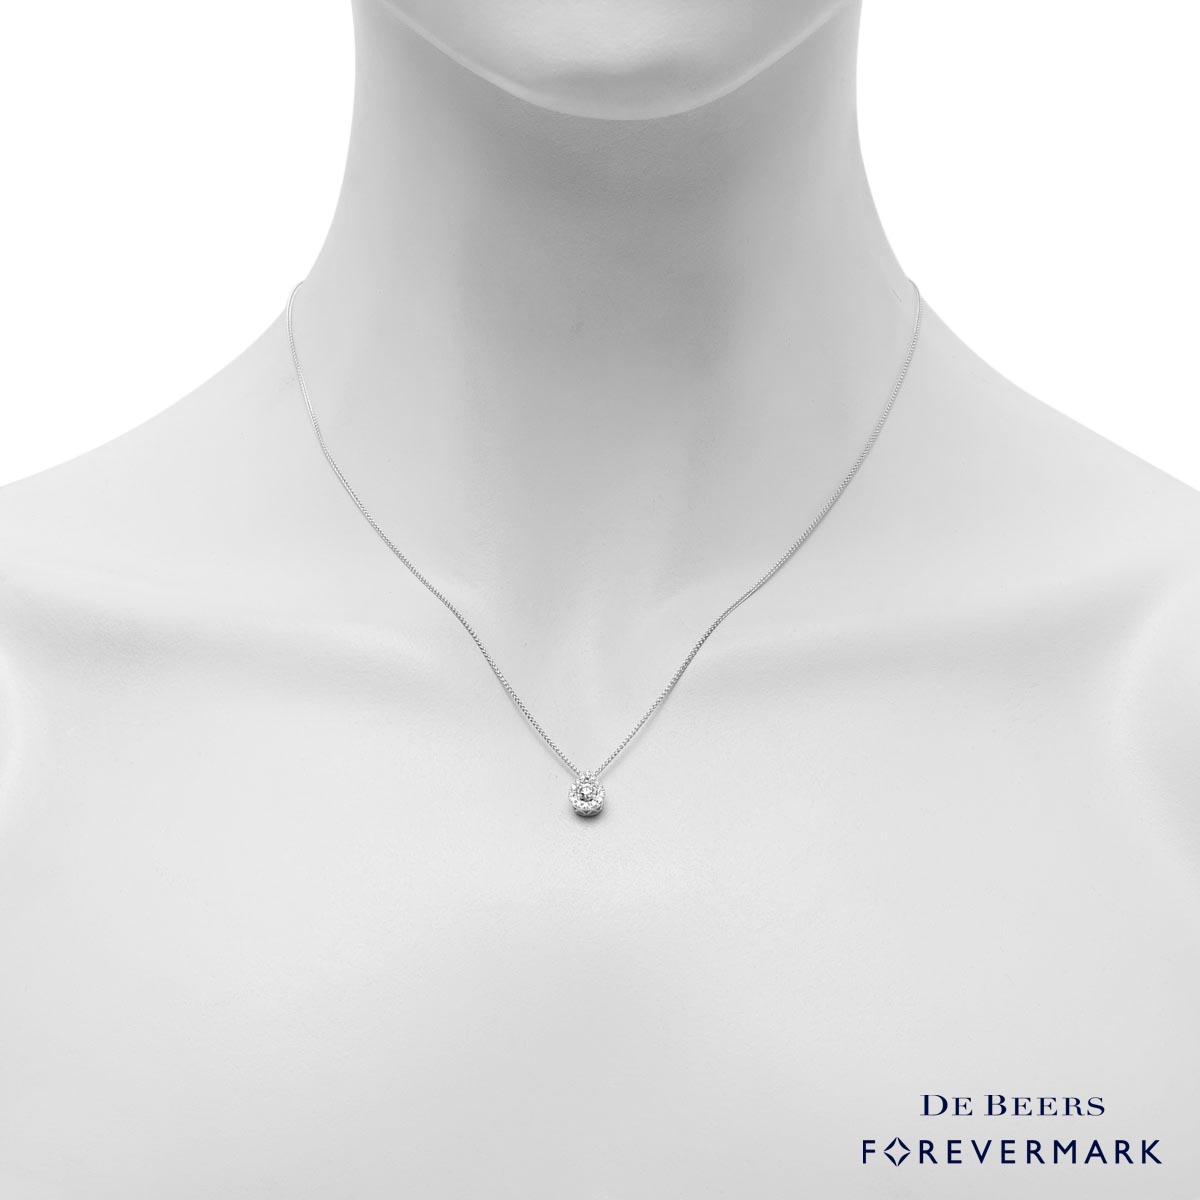 De Beers Forevermark Center of My Universe Pear Shaped Diamond Necklace in 18kt White Gold (1/3ct tw)